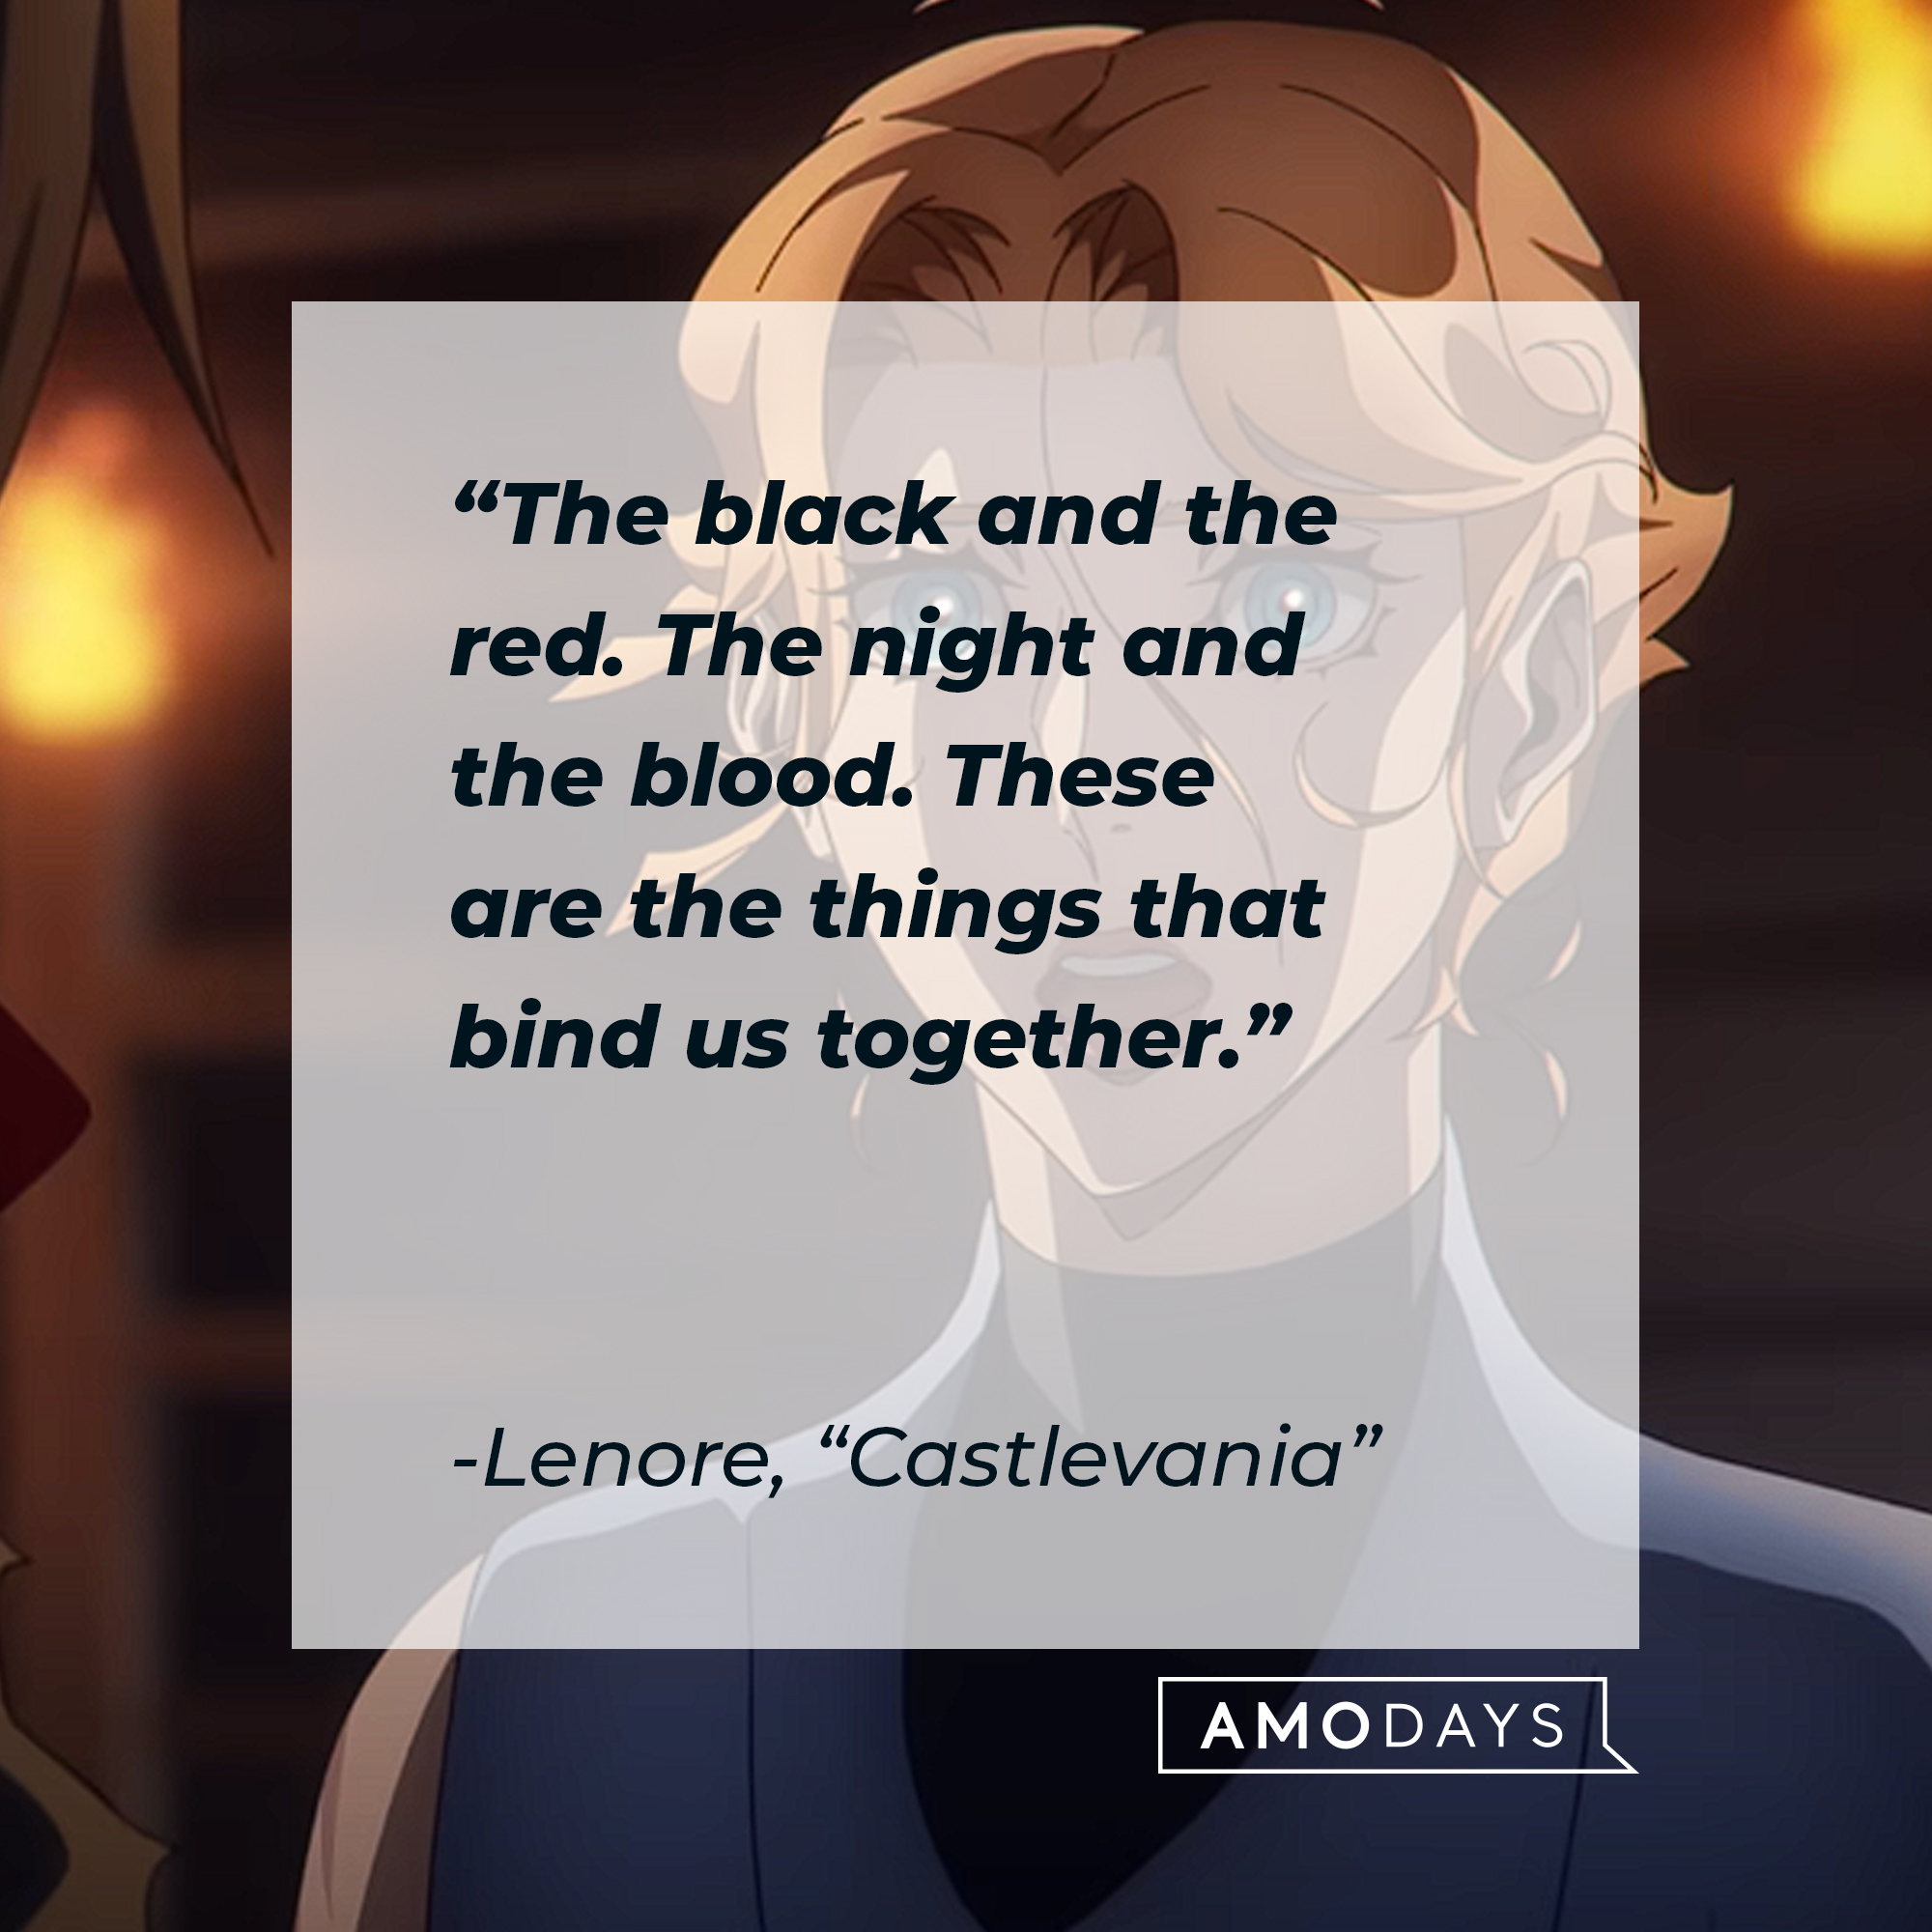 Lenore's quote from "Castlevania:" “The black and the red. The night and the blood. These are the things that bind us together.” | Source: Youtube.com/Netflix